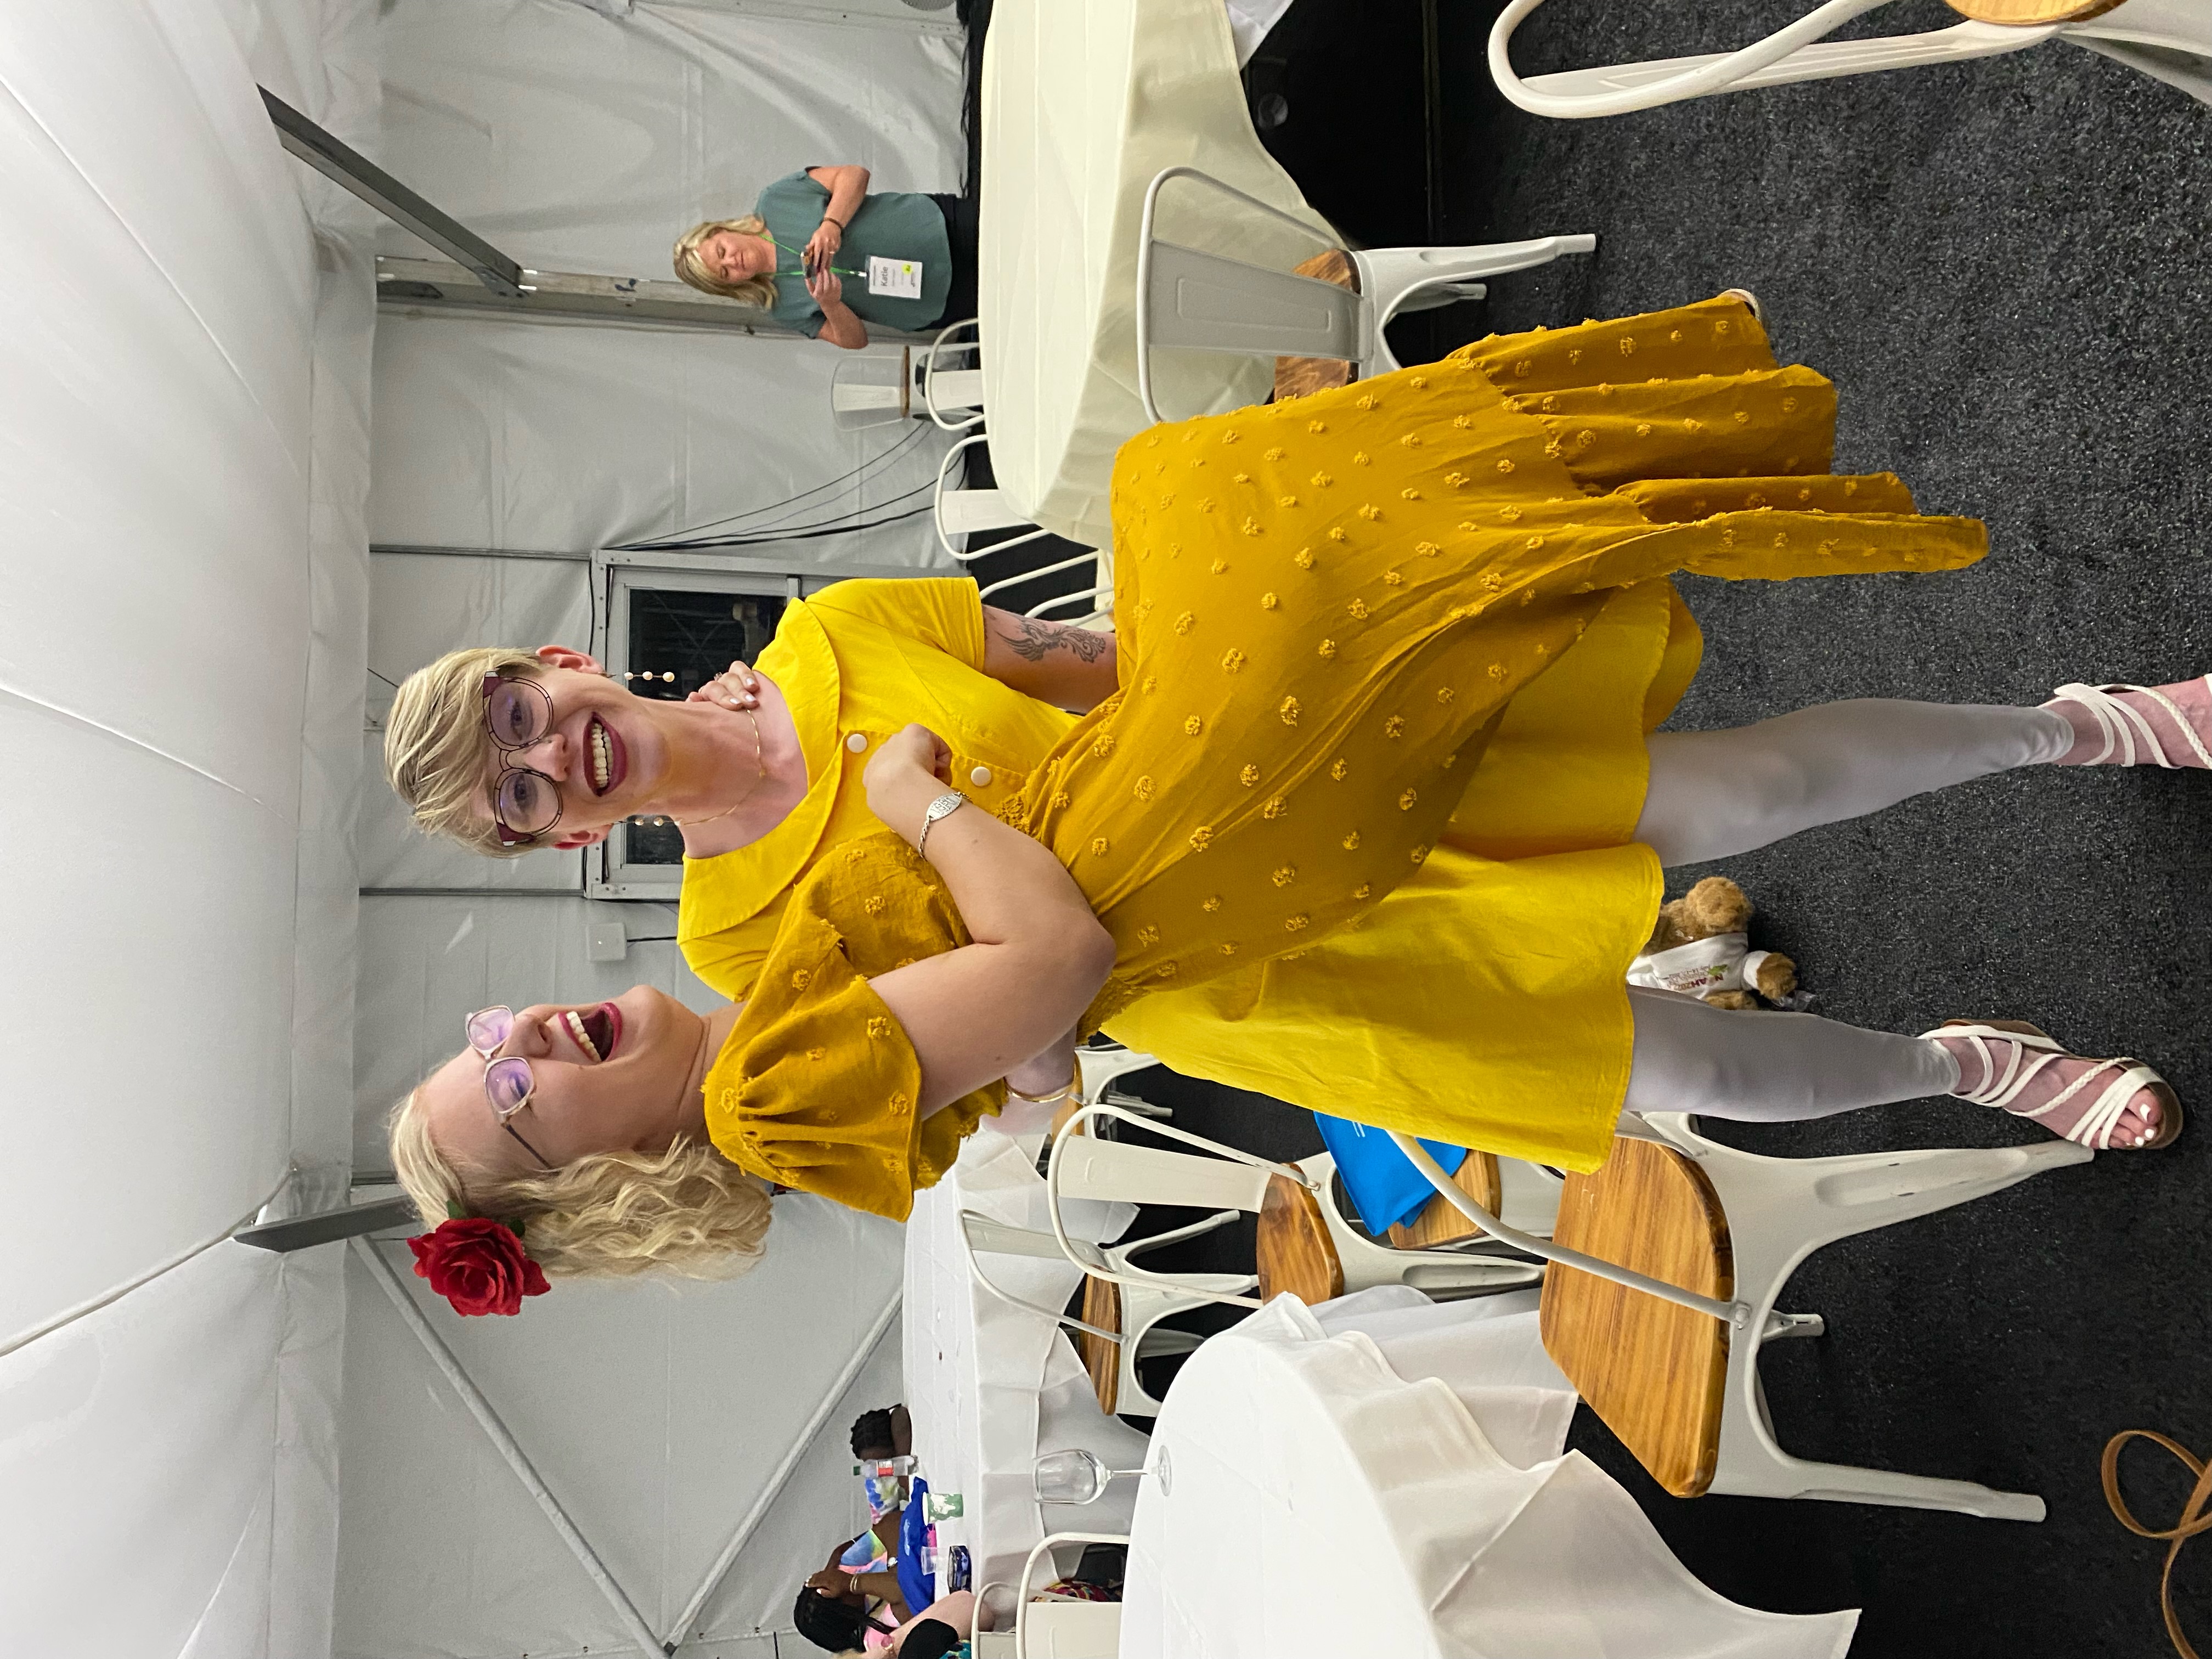 photo of casey and cassandra by some round tables. cassandra wears a yellow dress and takes a wide stance with a goofy grimace as she lifts casey bridal style. casey also wears a yellow dress and laughs at the situation